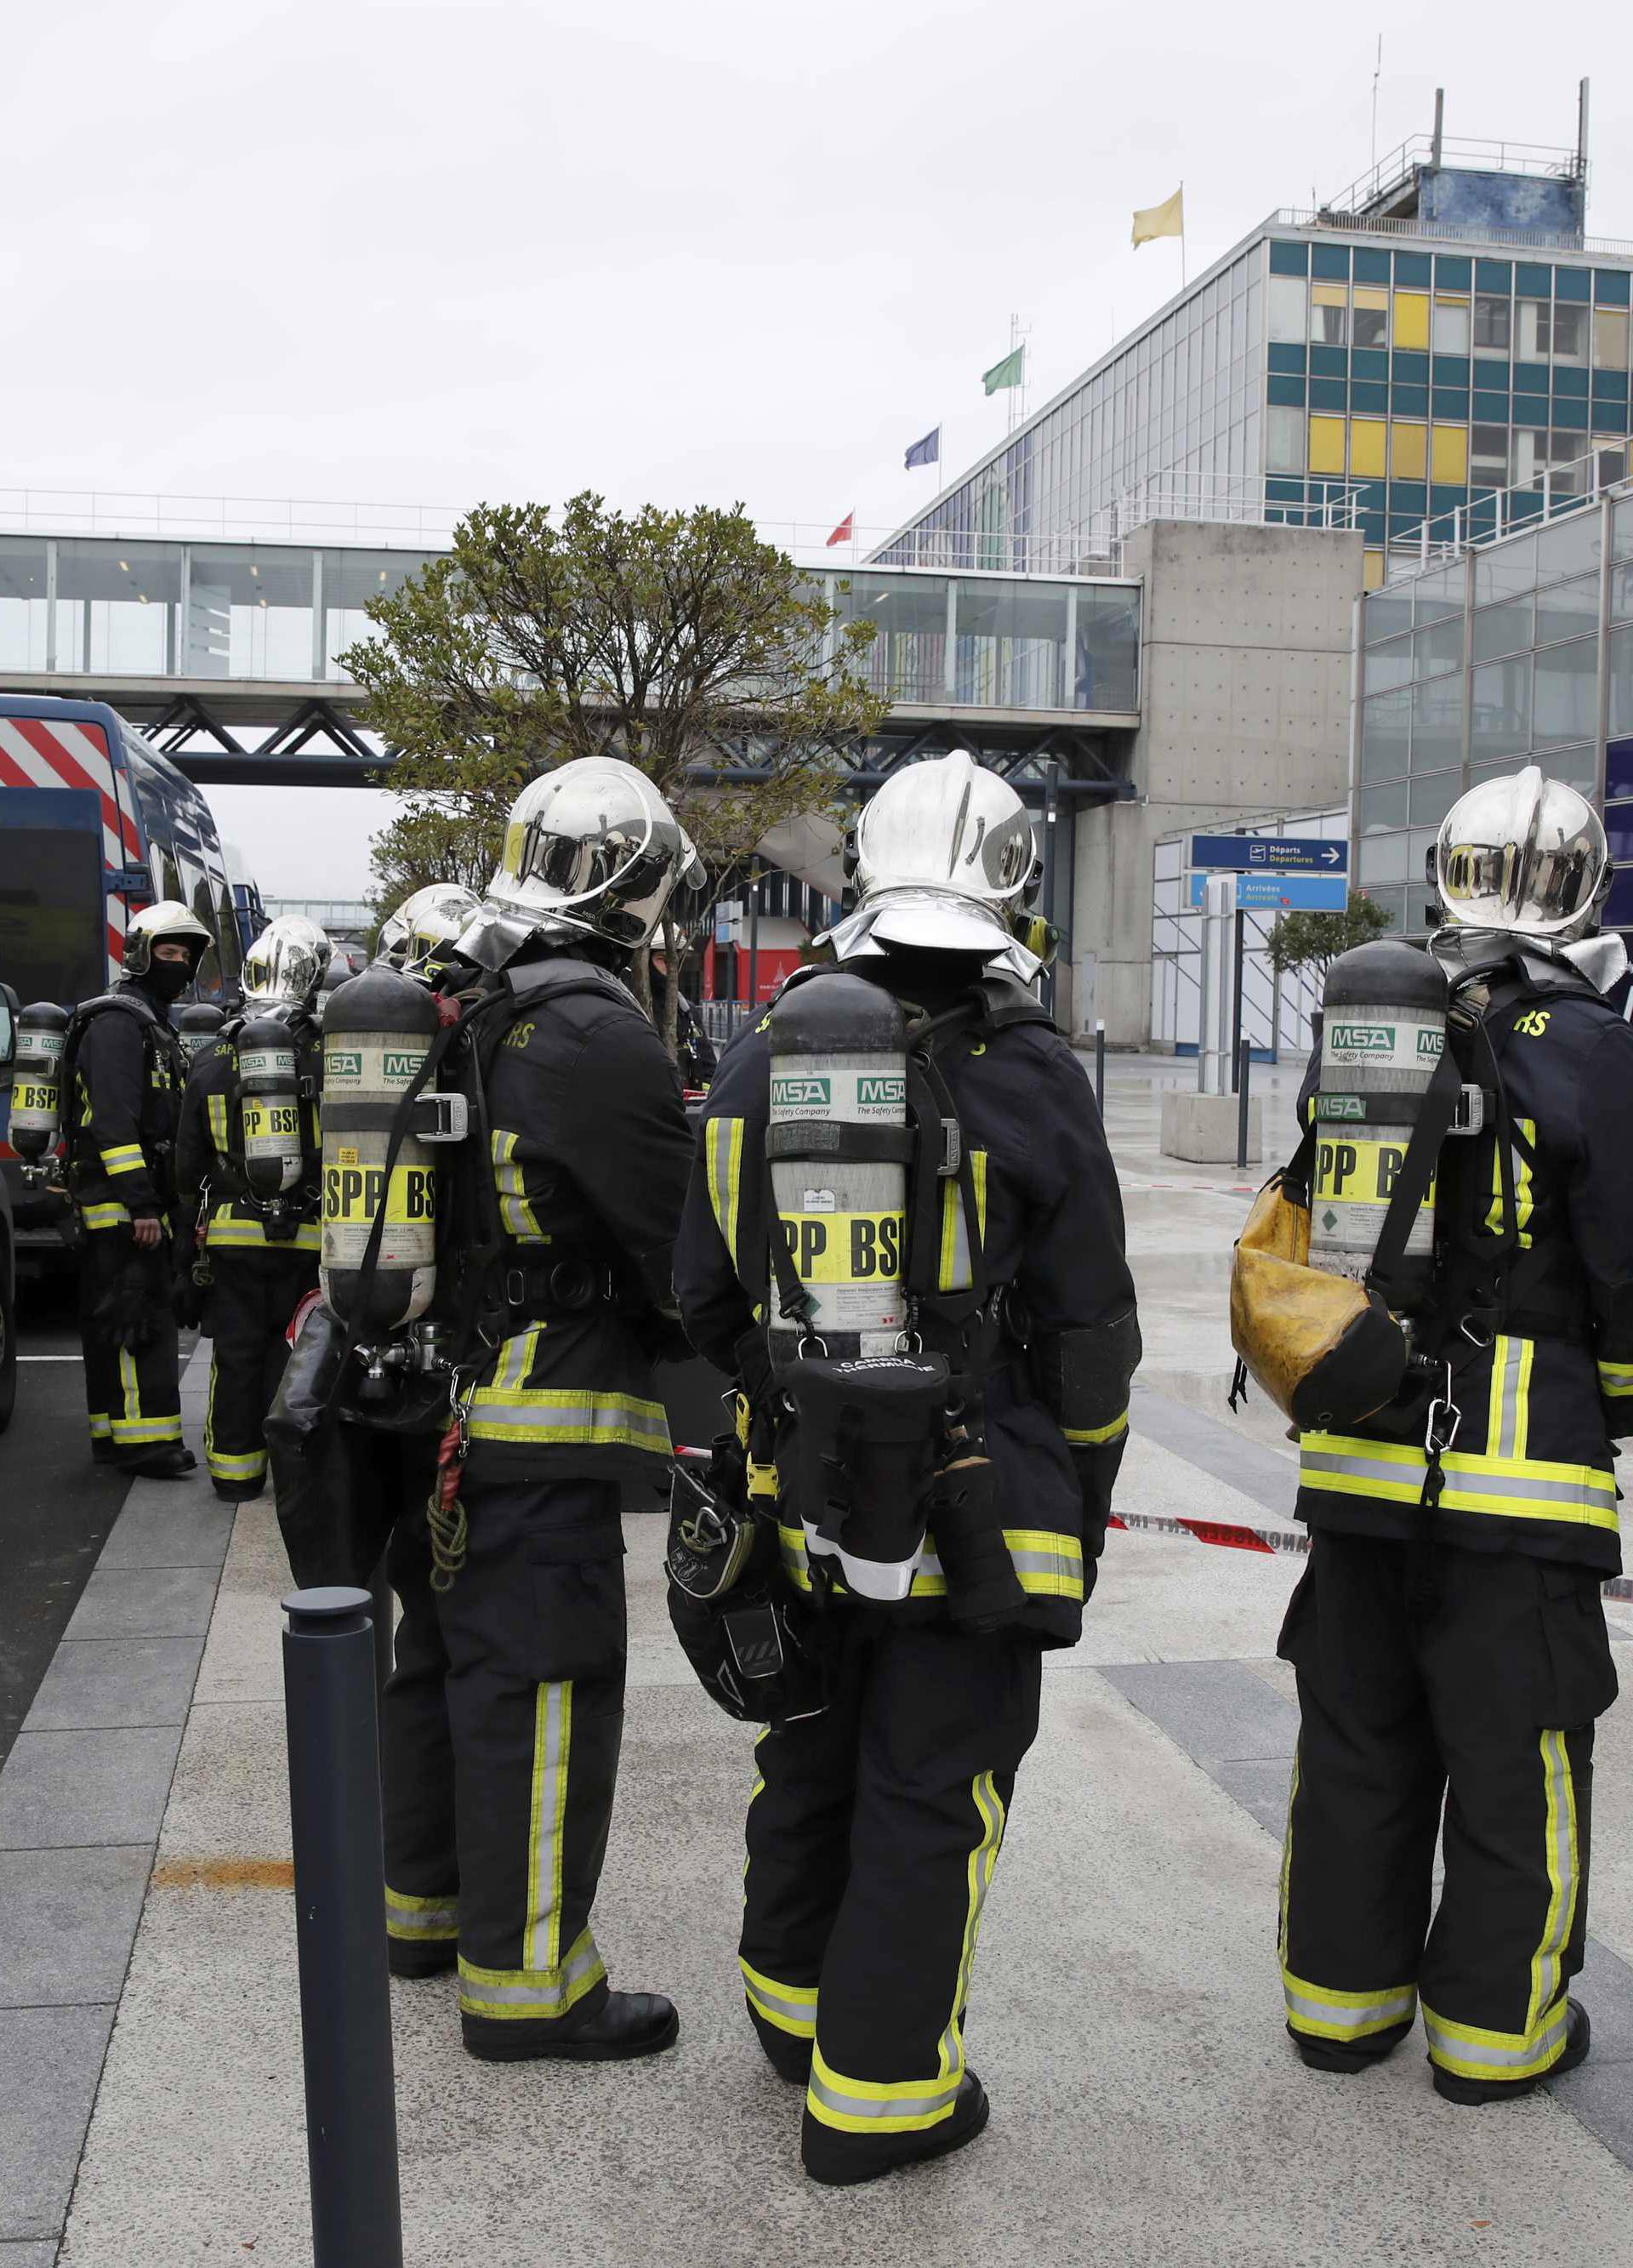 Emergency services  at Orly airport southern terminal after shooting incident near Paris